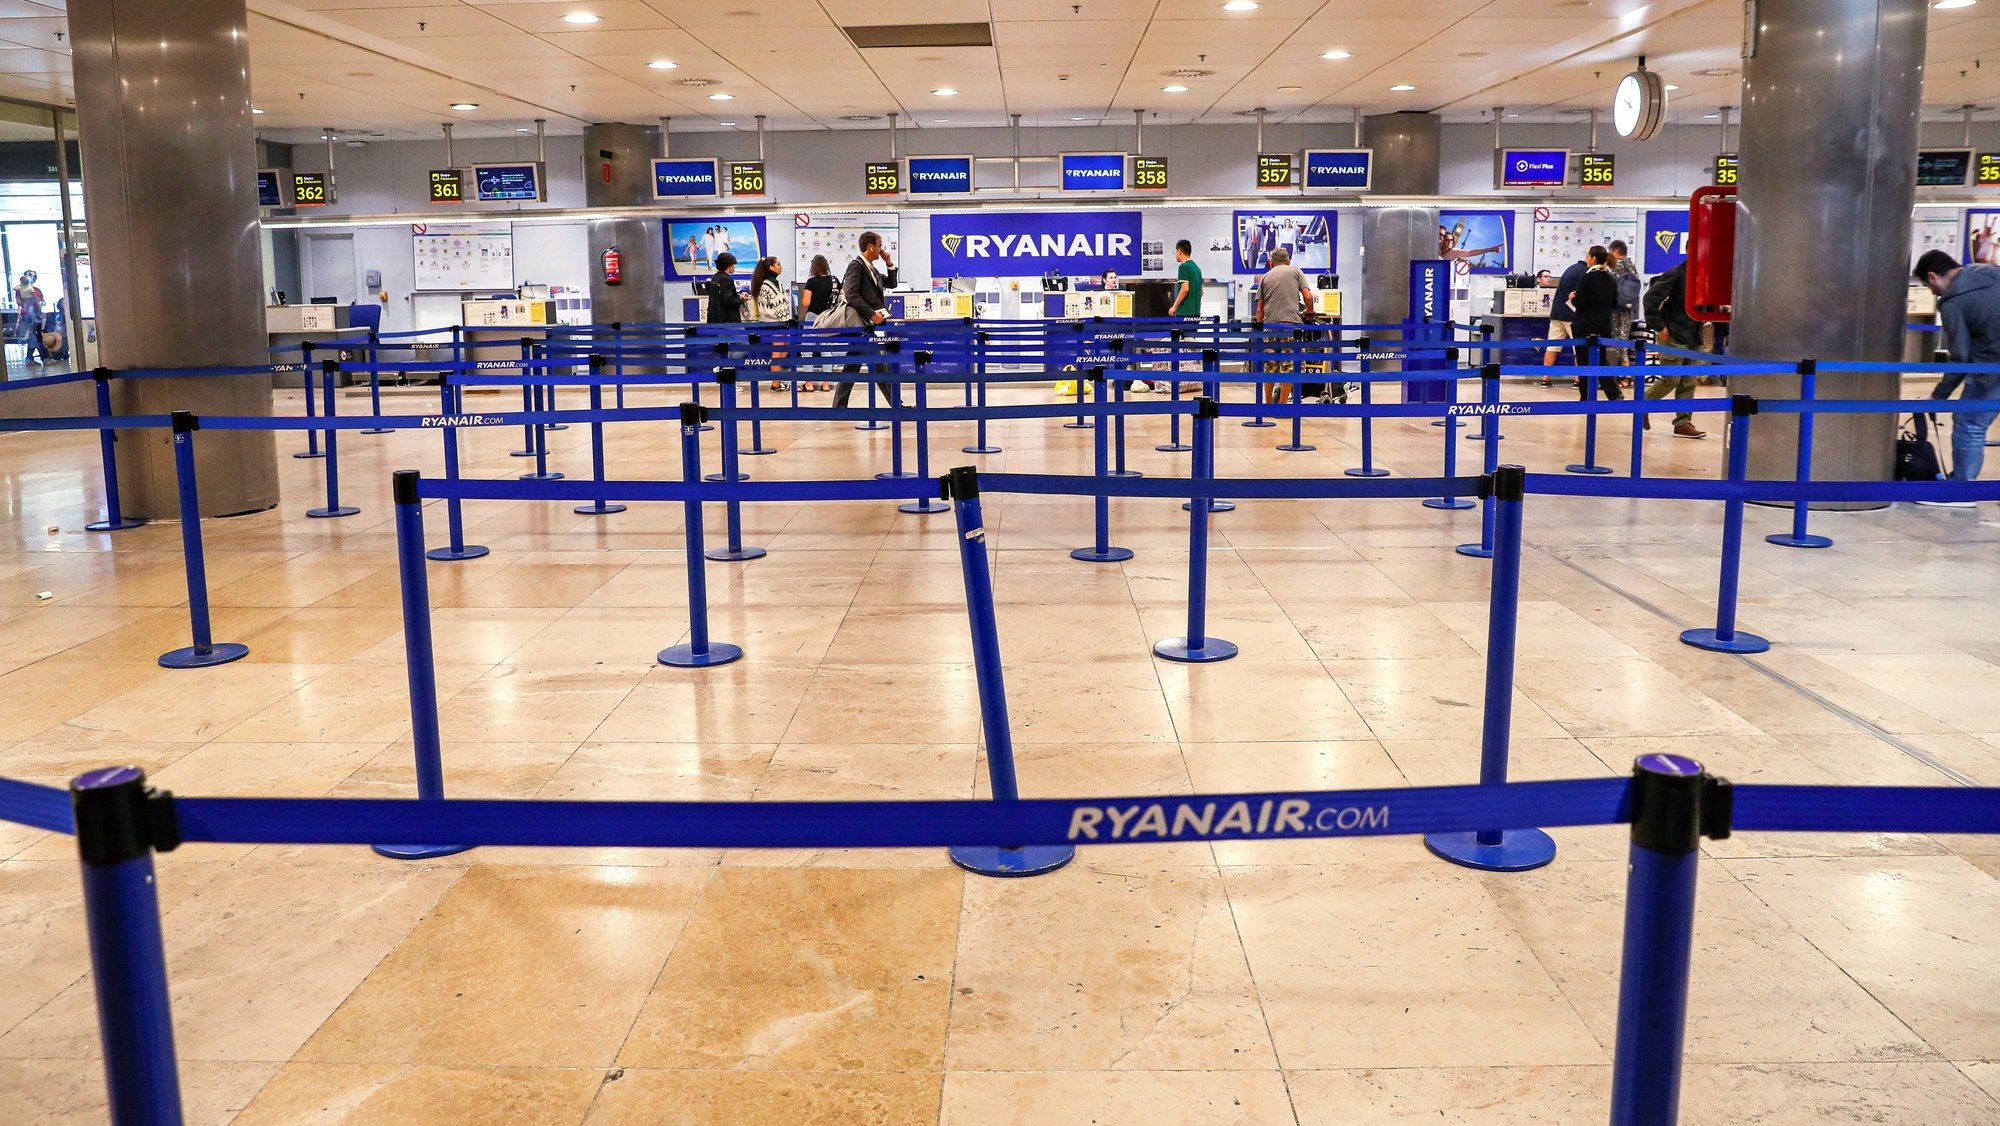 epa07852821 A view on Ryanair check-in counters at Adolfo Suarez Airport in Barajas, Madrid, Spain, 19 September 2019. According to reports, Ryanair cabin crew members are on strike on 19,20 and 22September in a protest against the planned closure of four of the airline bases in Spain: Tenerife Sur, Lanzarote, Gran Canaria and Girona on 08 January 2020.  EPA/EMILIO NARANJO